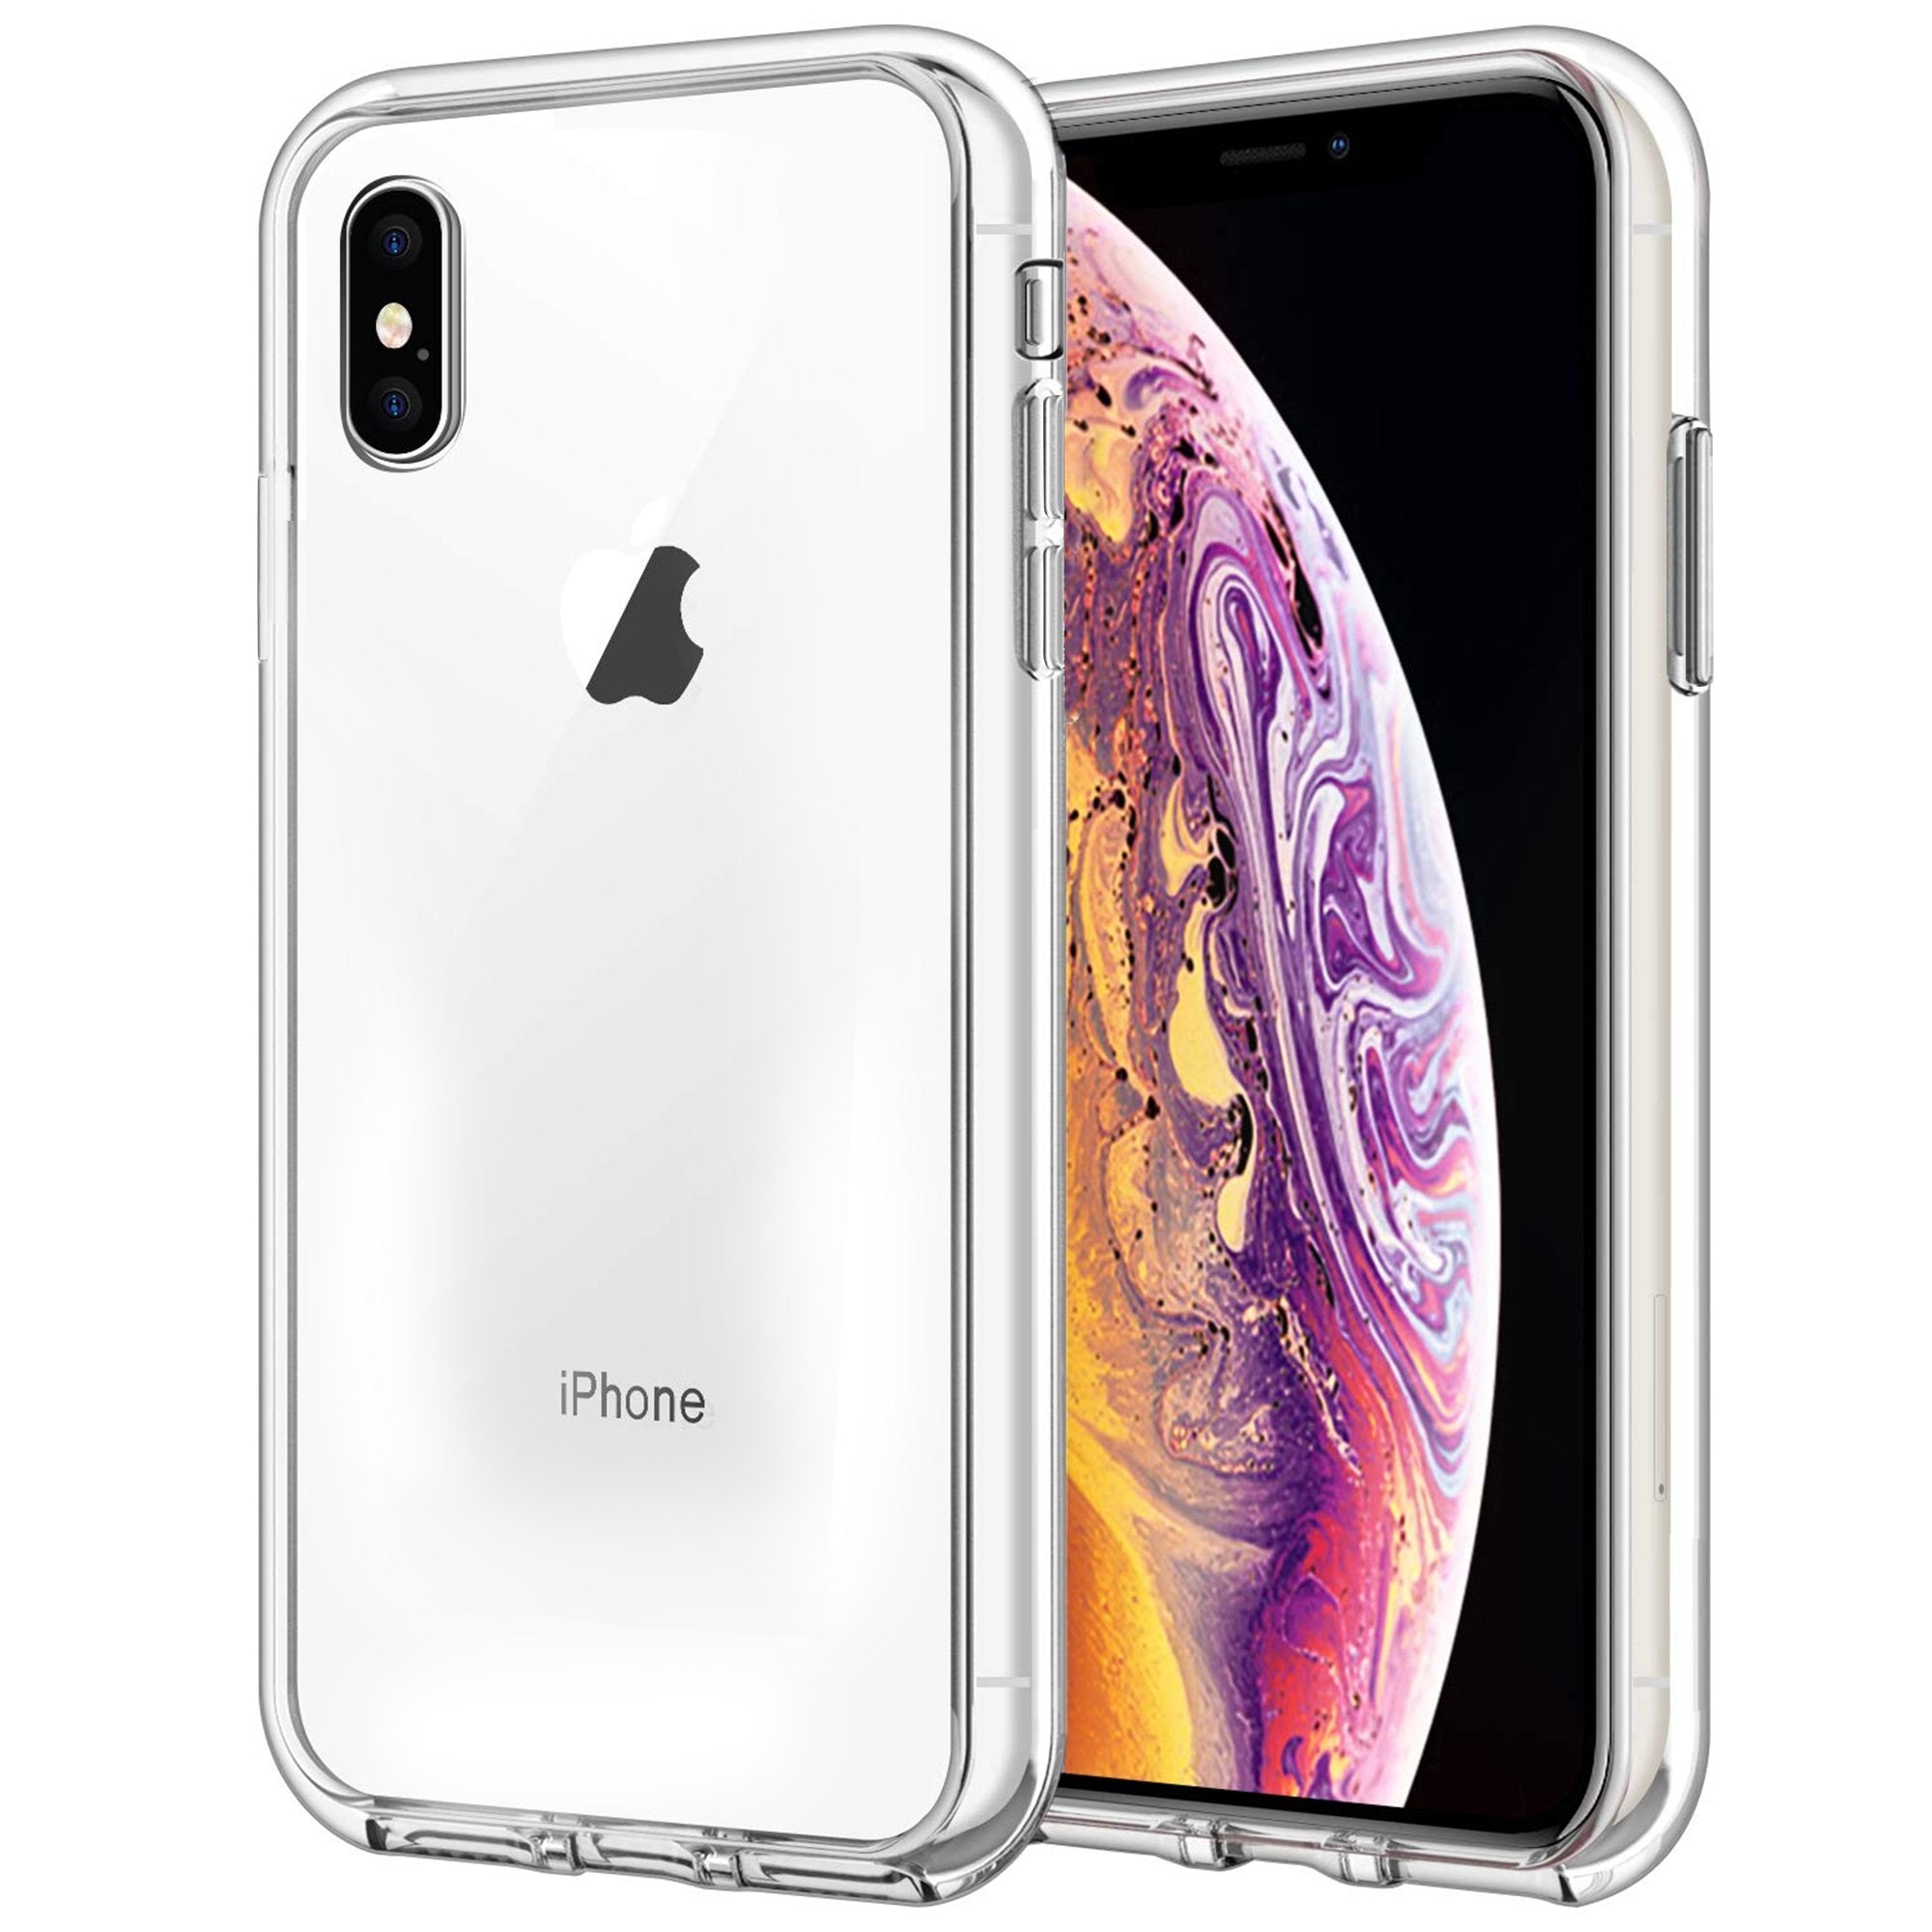 Case for iPhone XS Shock Proof Soft TPU Silicone Phone Clear Slim Cover